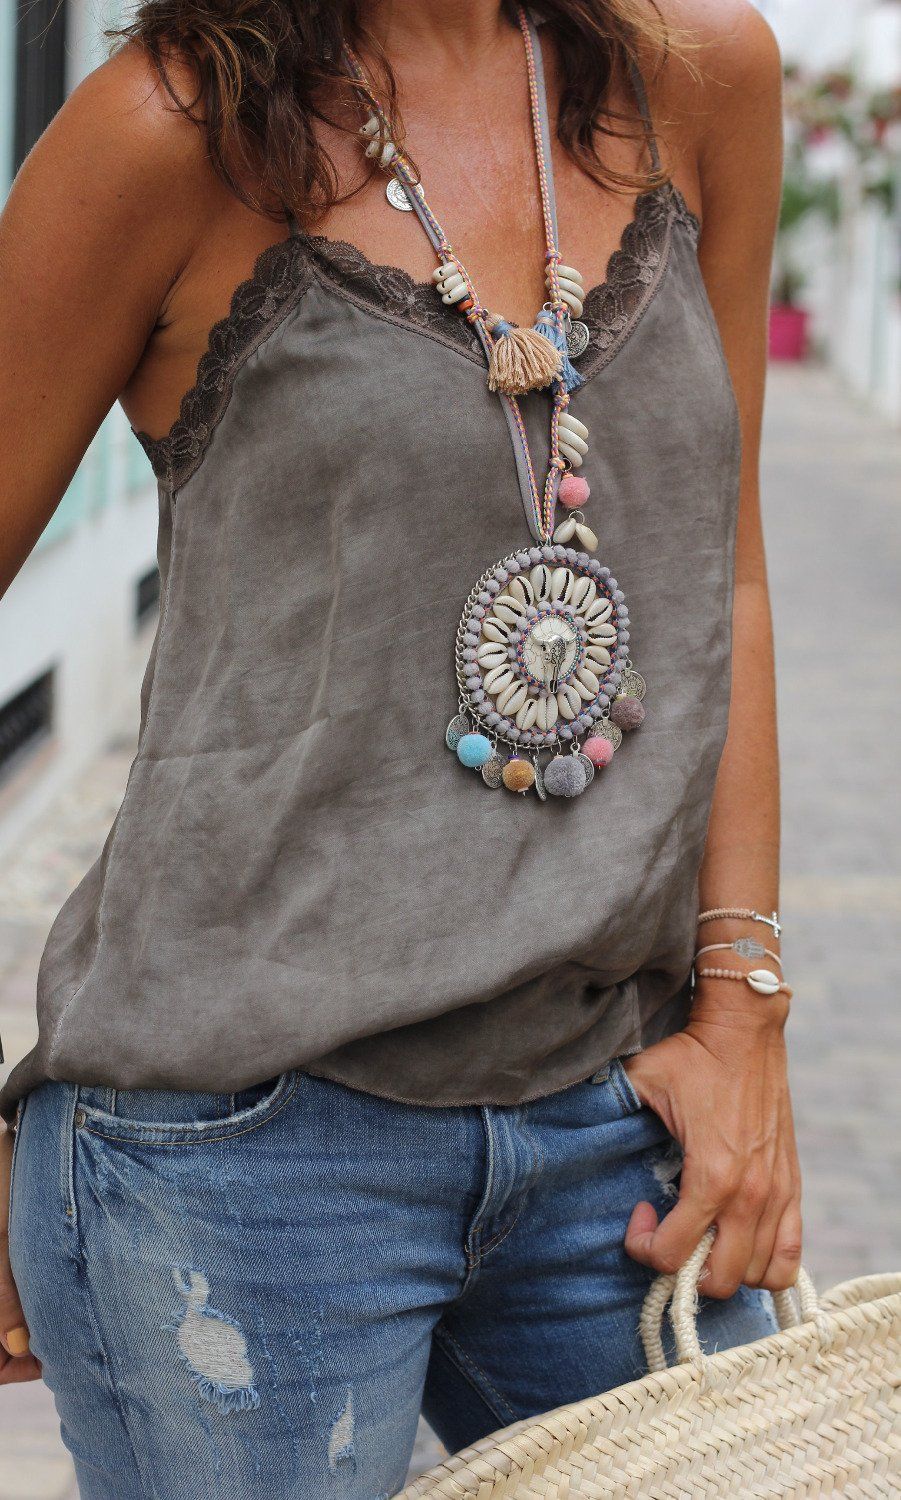 jewelry outfit ideas 